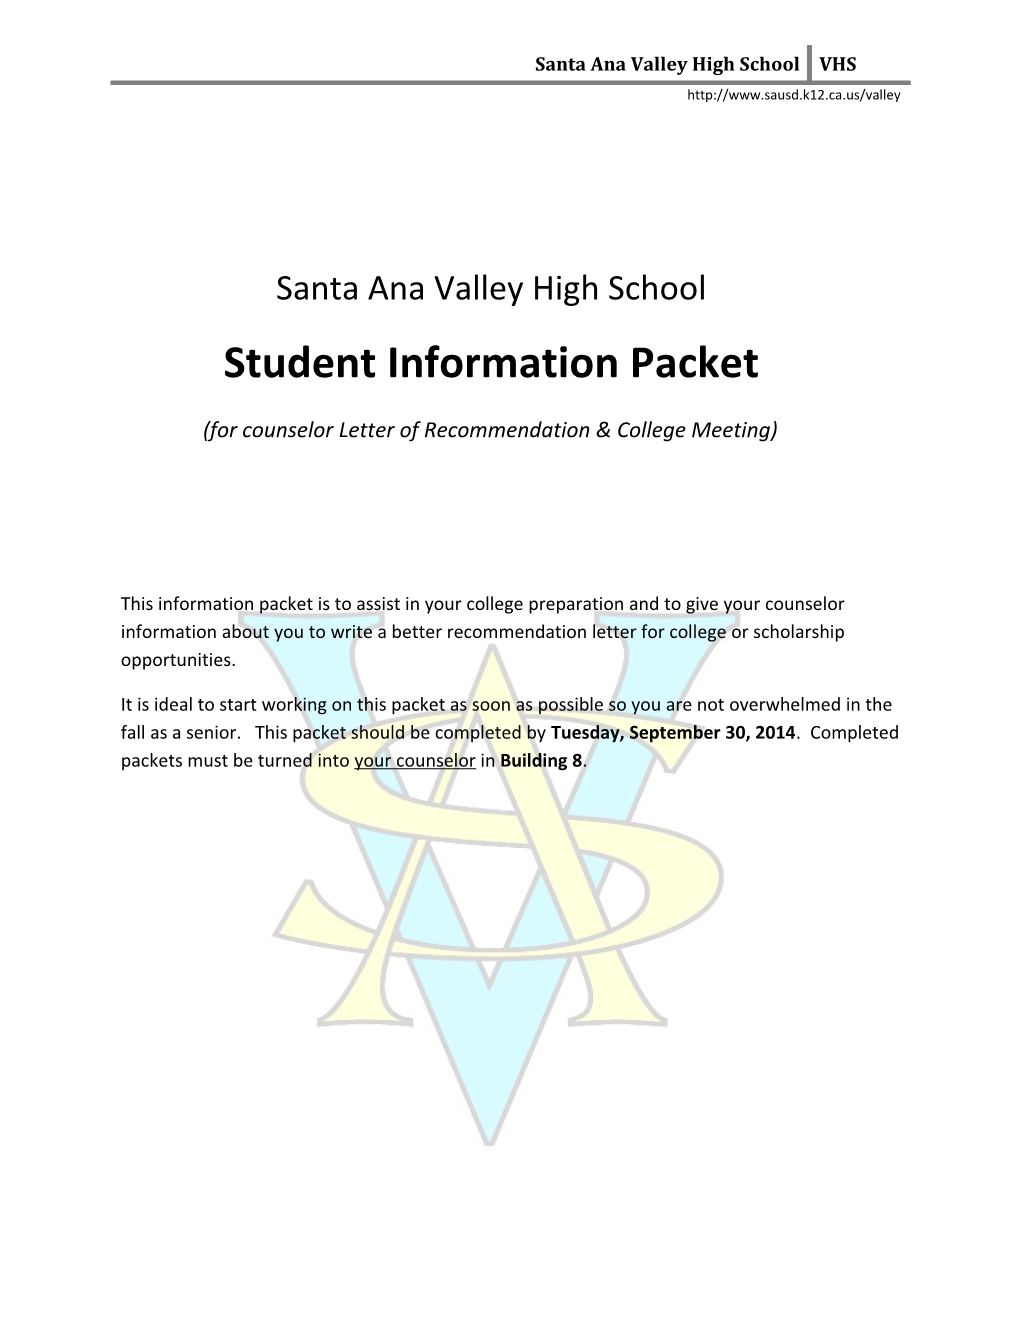 Student Information Packet